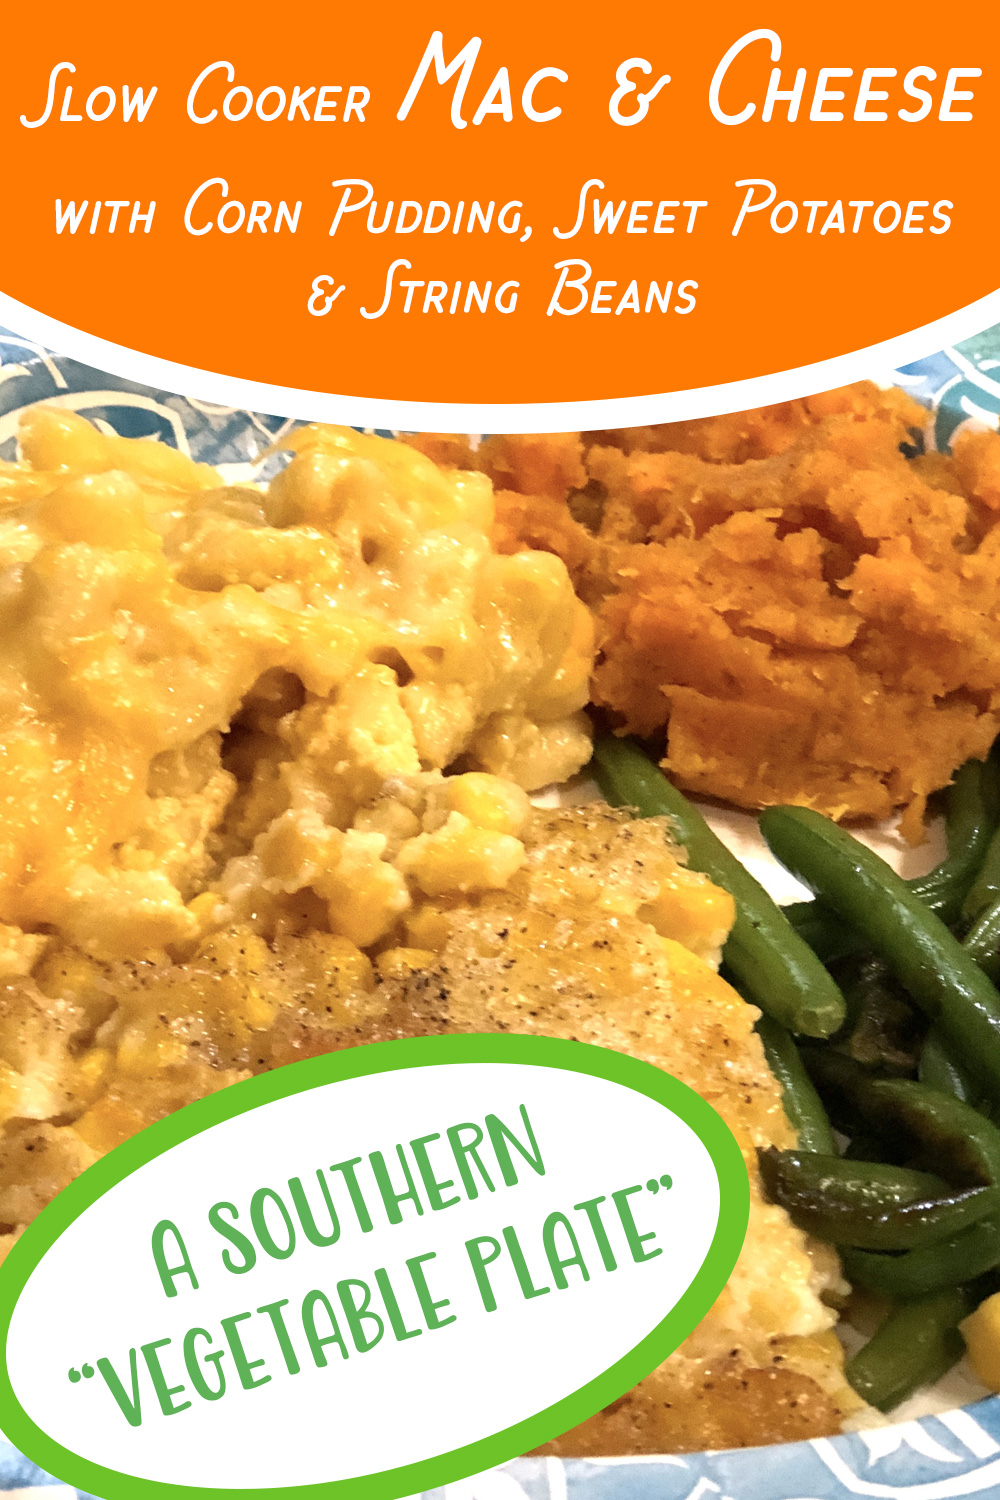 Country Vegetable Plate: Crock Pot Mac & Cheese, Corn Pudding, Sweet Potatoes & Green Beans